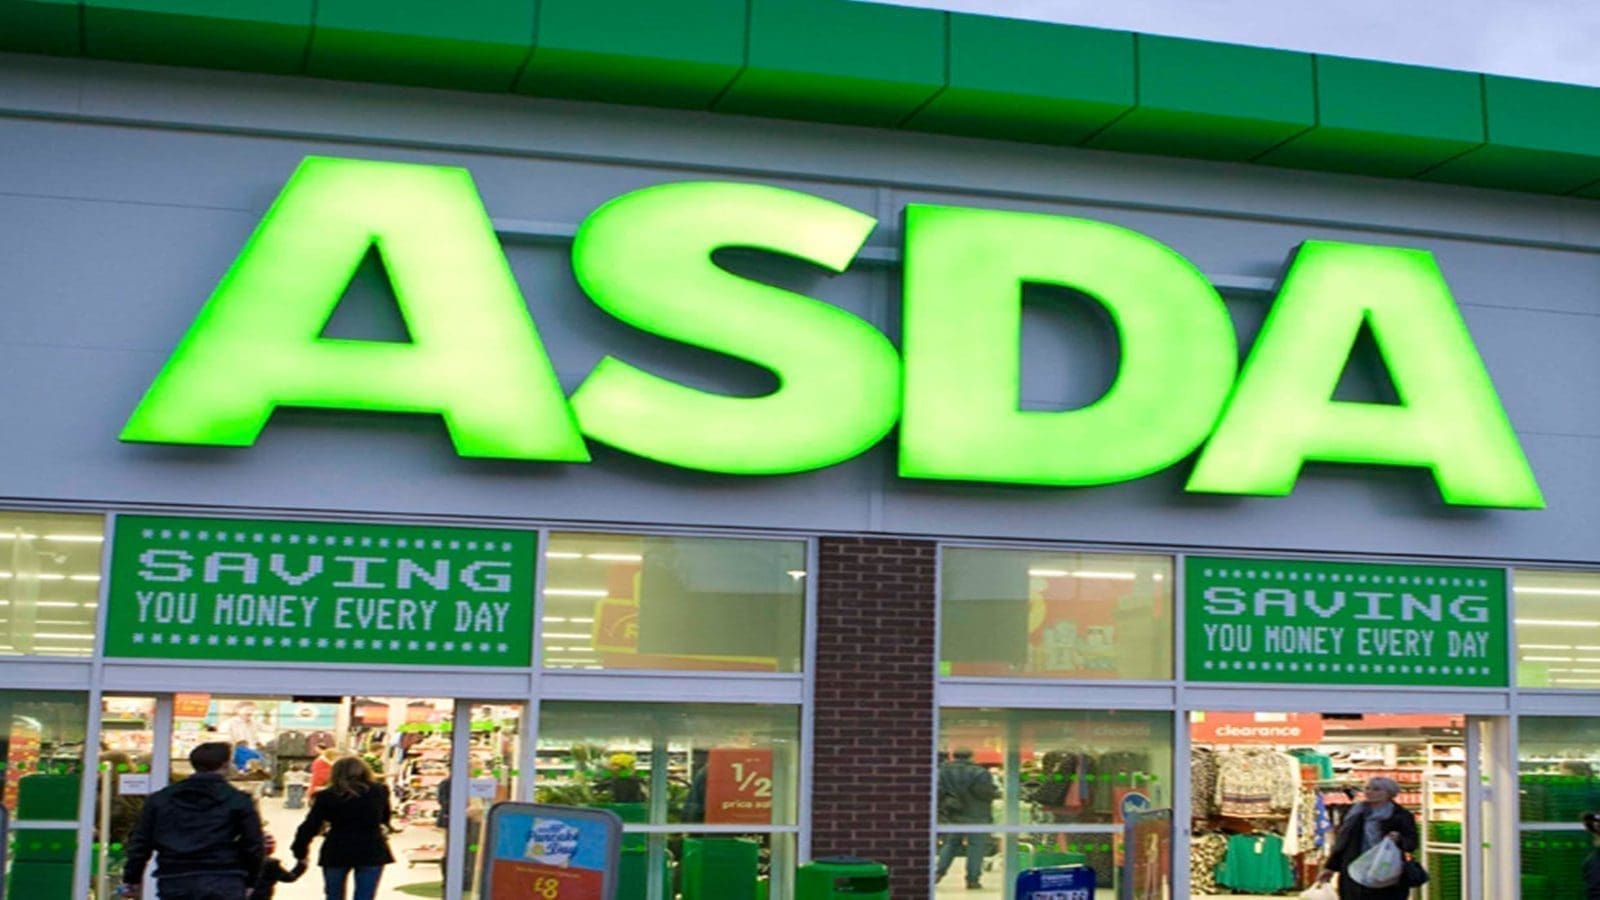 Asda dismisses “best before” dates on a variety of fresh foods to reduce waste